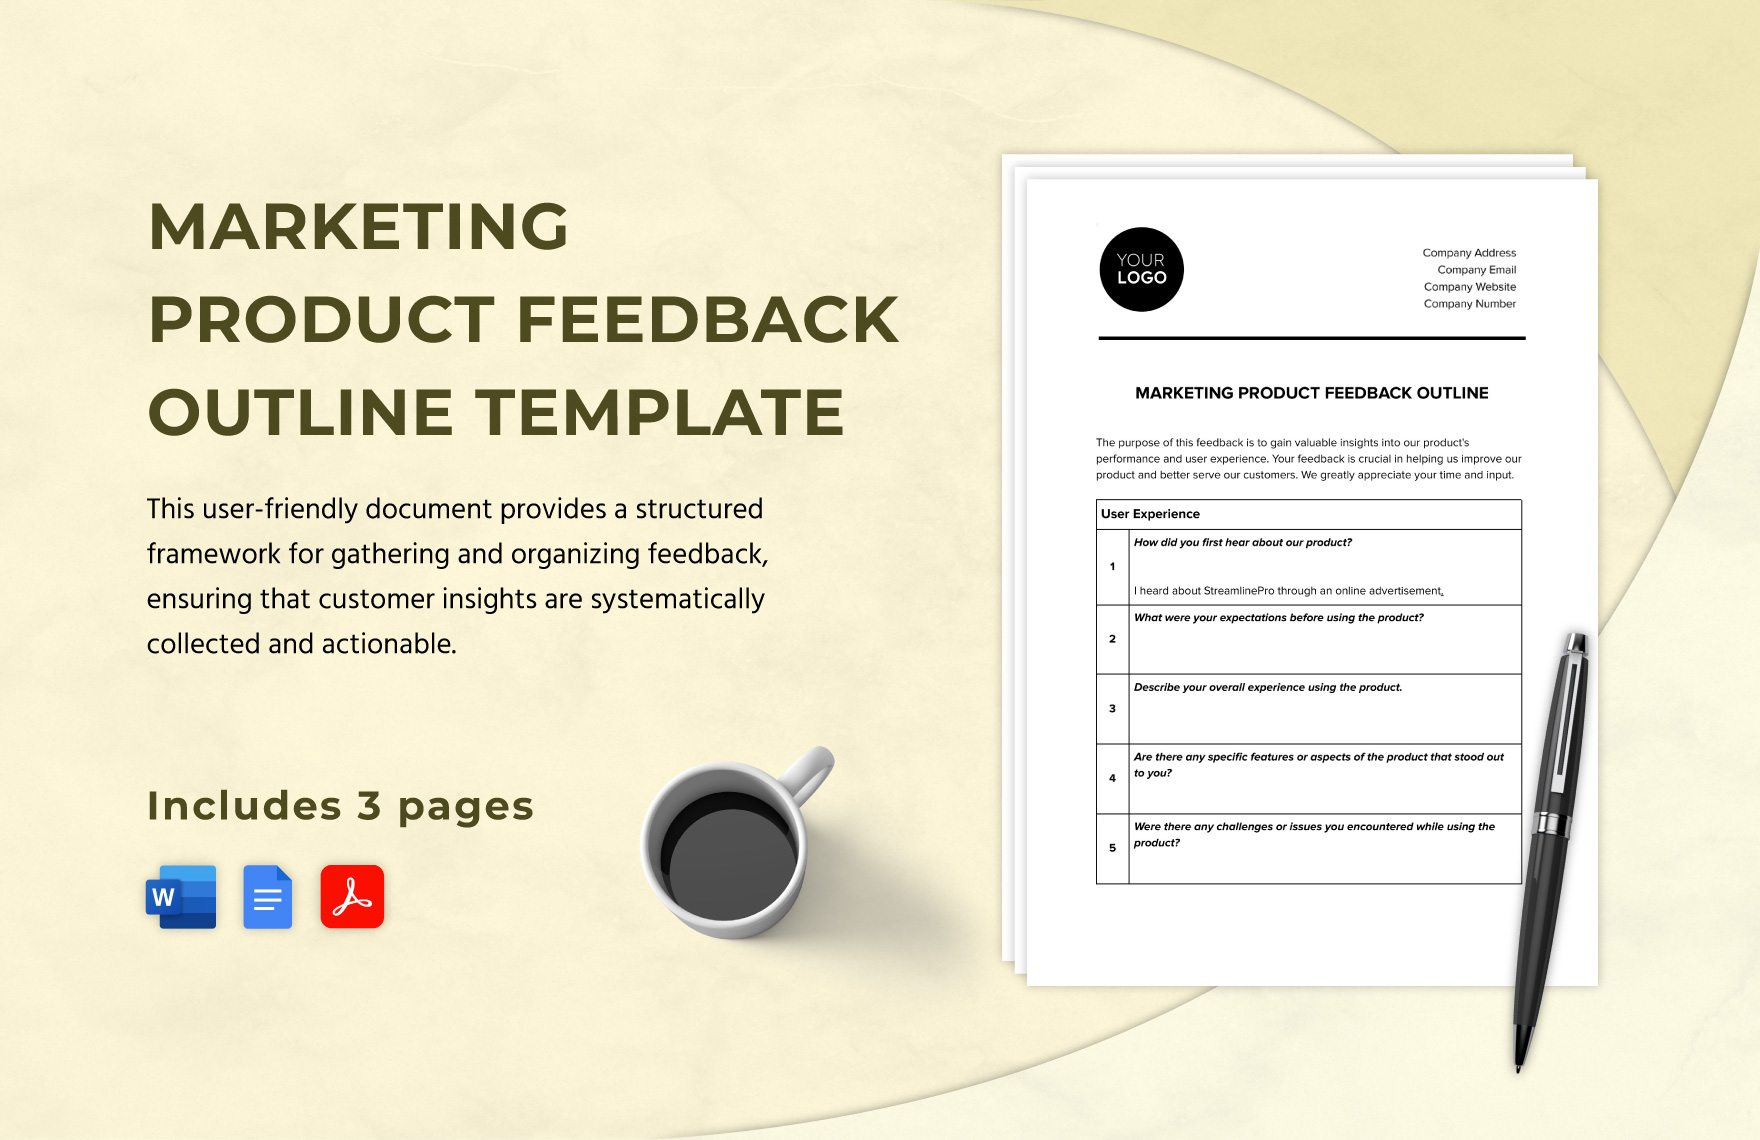 Marketing Product Feedback Outline Template in Word, Google Docs, PDF